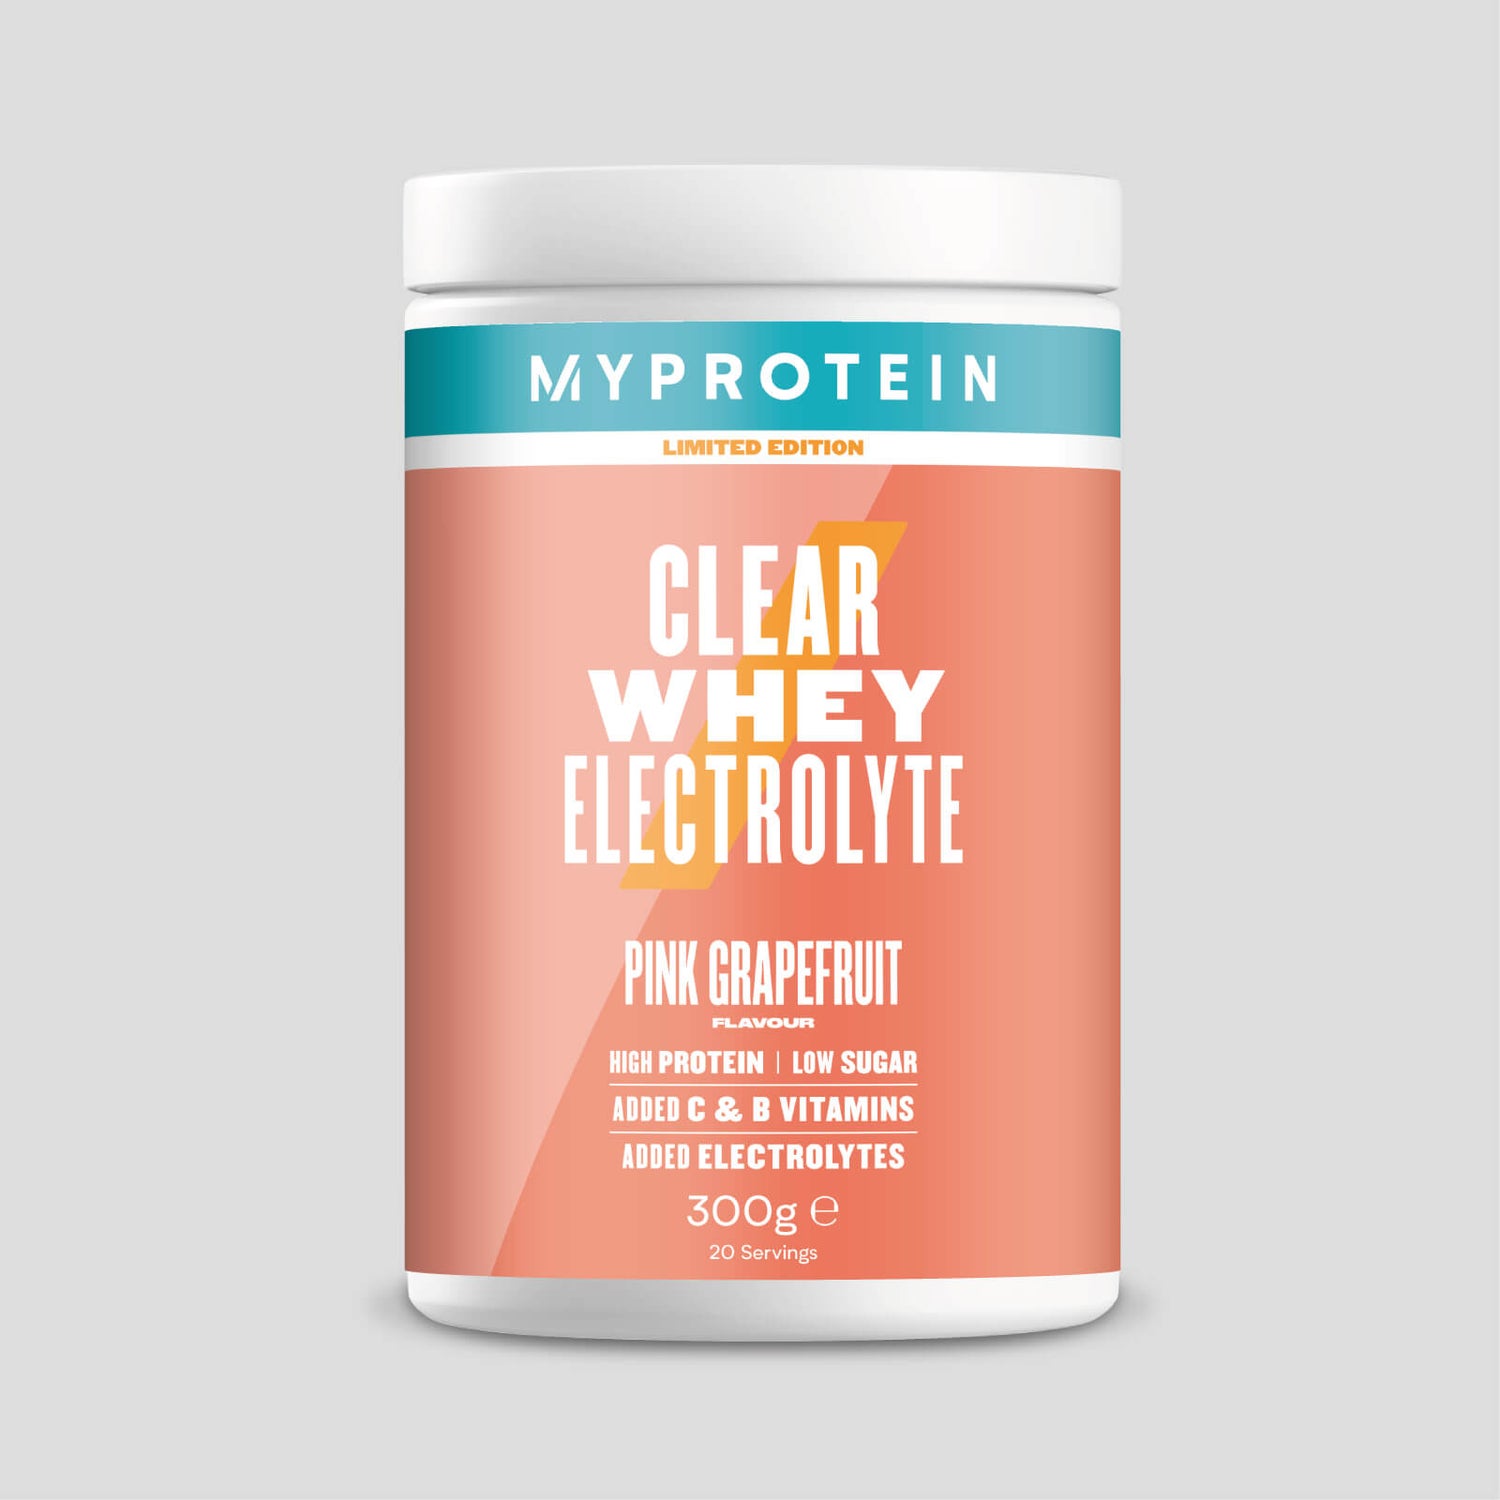 Clear Whey Electrolyte - 20servings - Pompelmo rosa